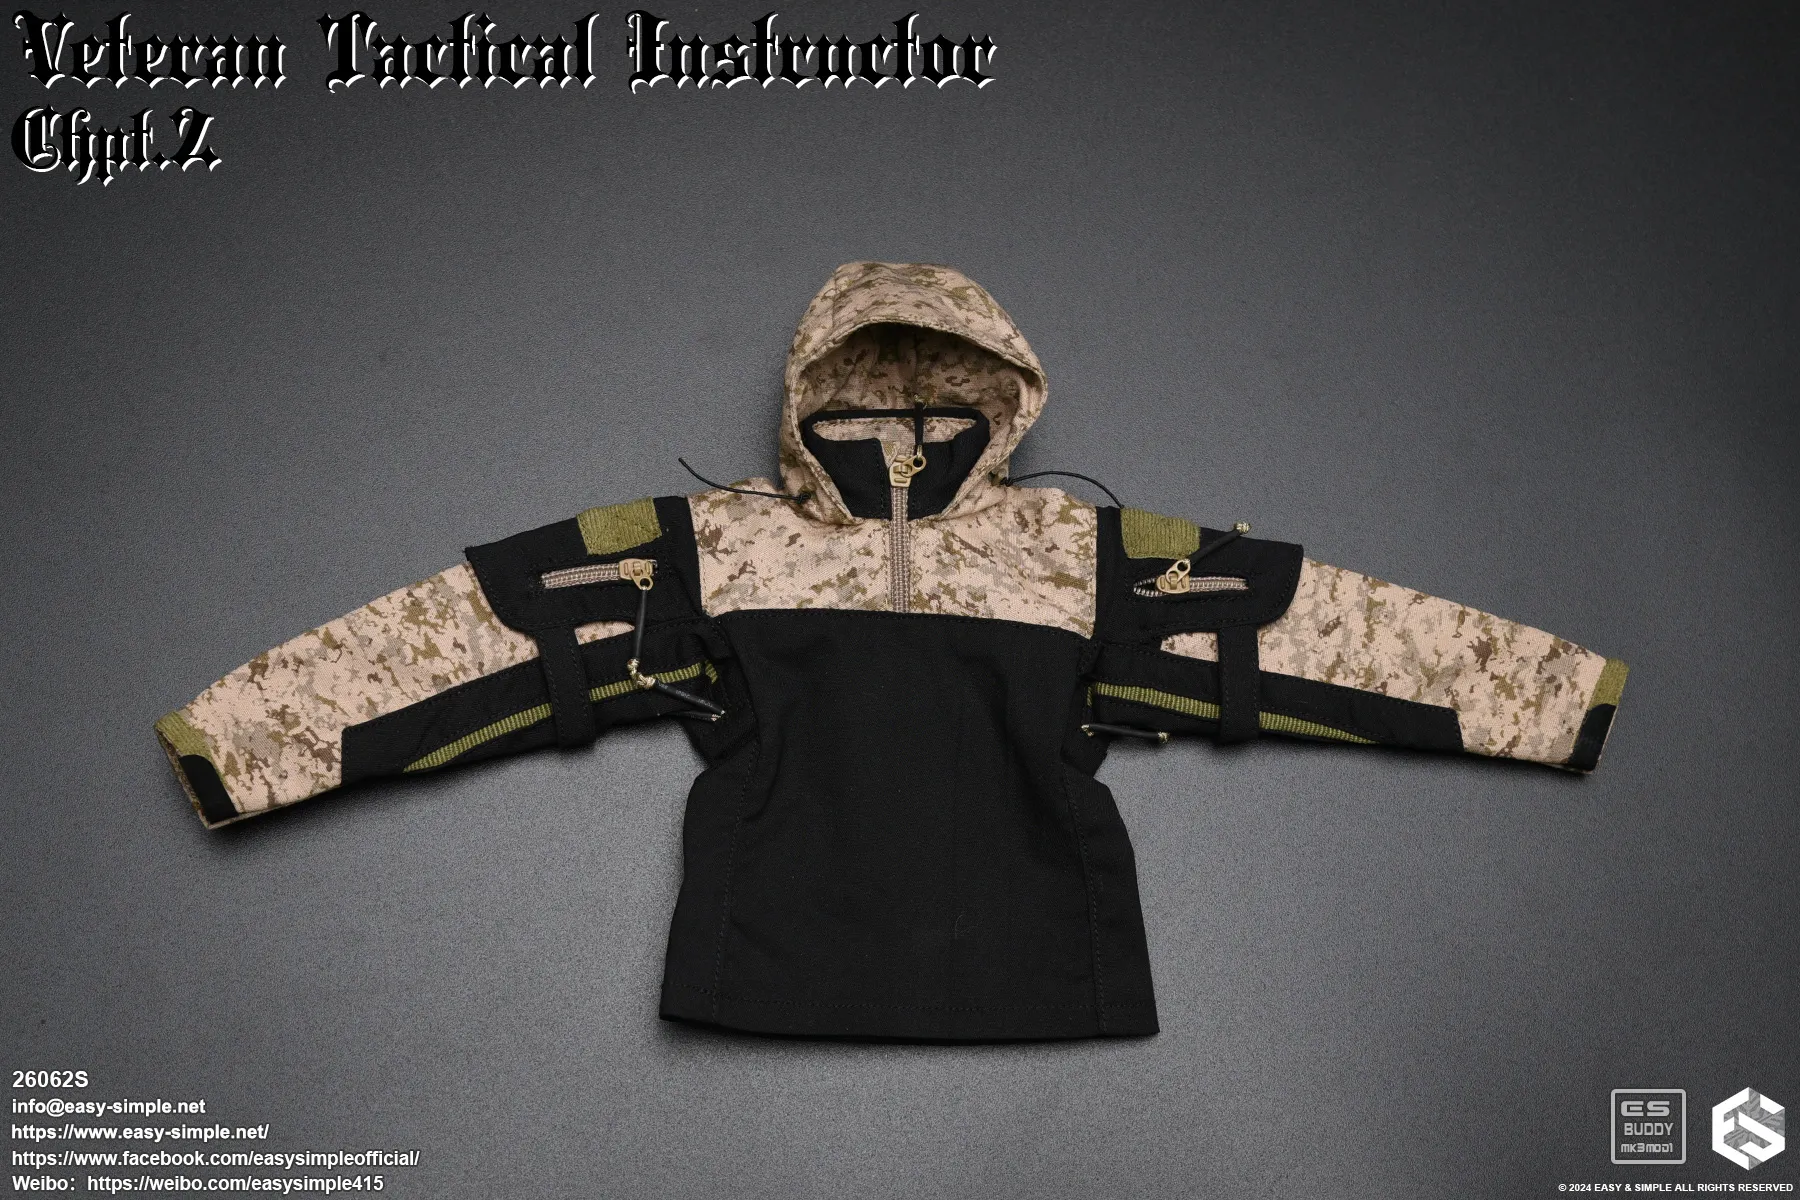 tactical - NEW PRODUCT: Easy & Simple Veteran Tactical Instructor Chapter II 26062S Format,webp